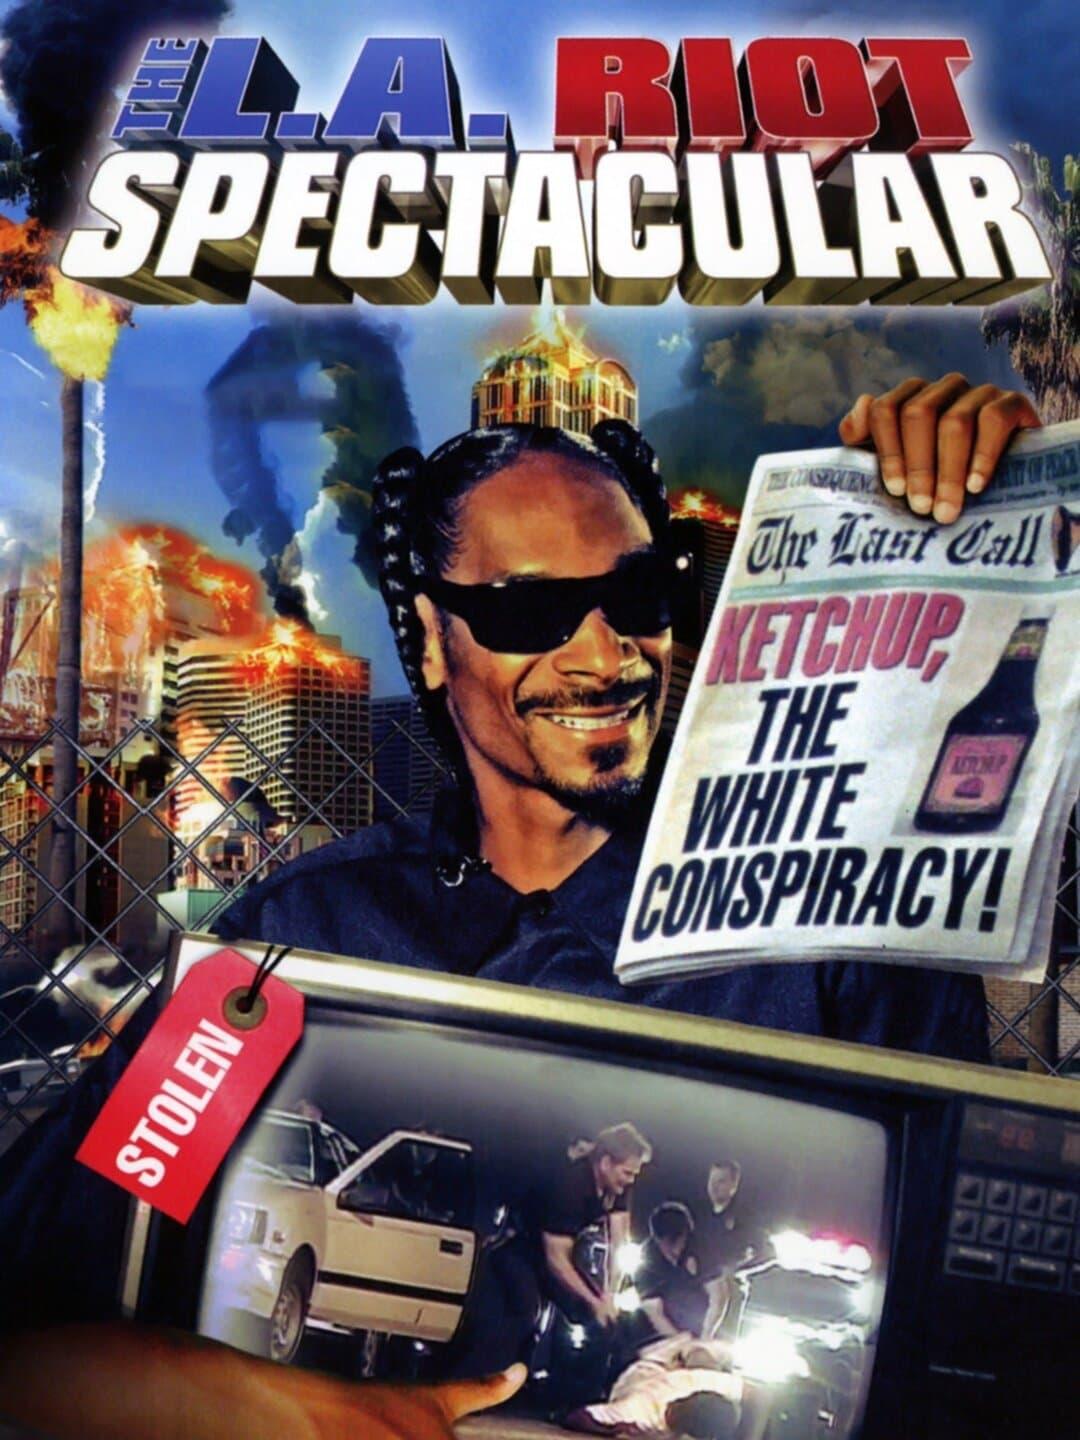 The L.A. Riot Spectacular poster